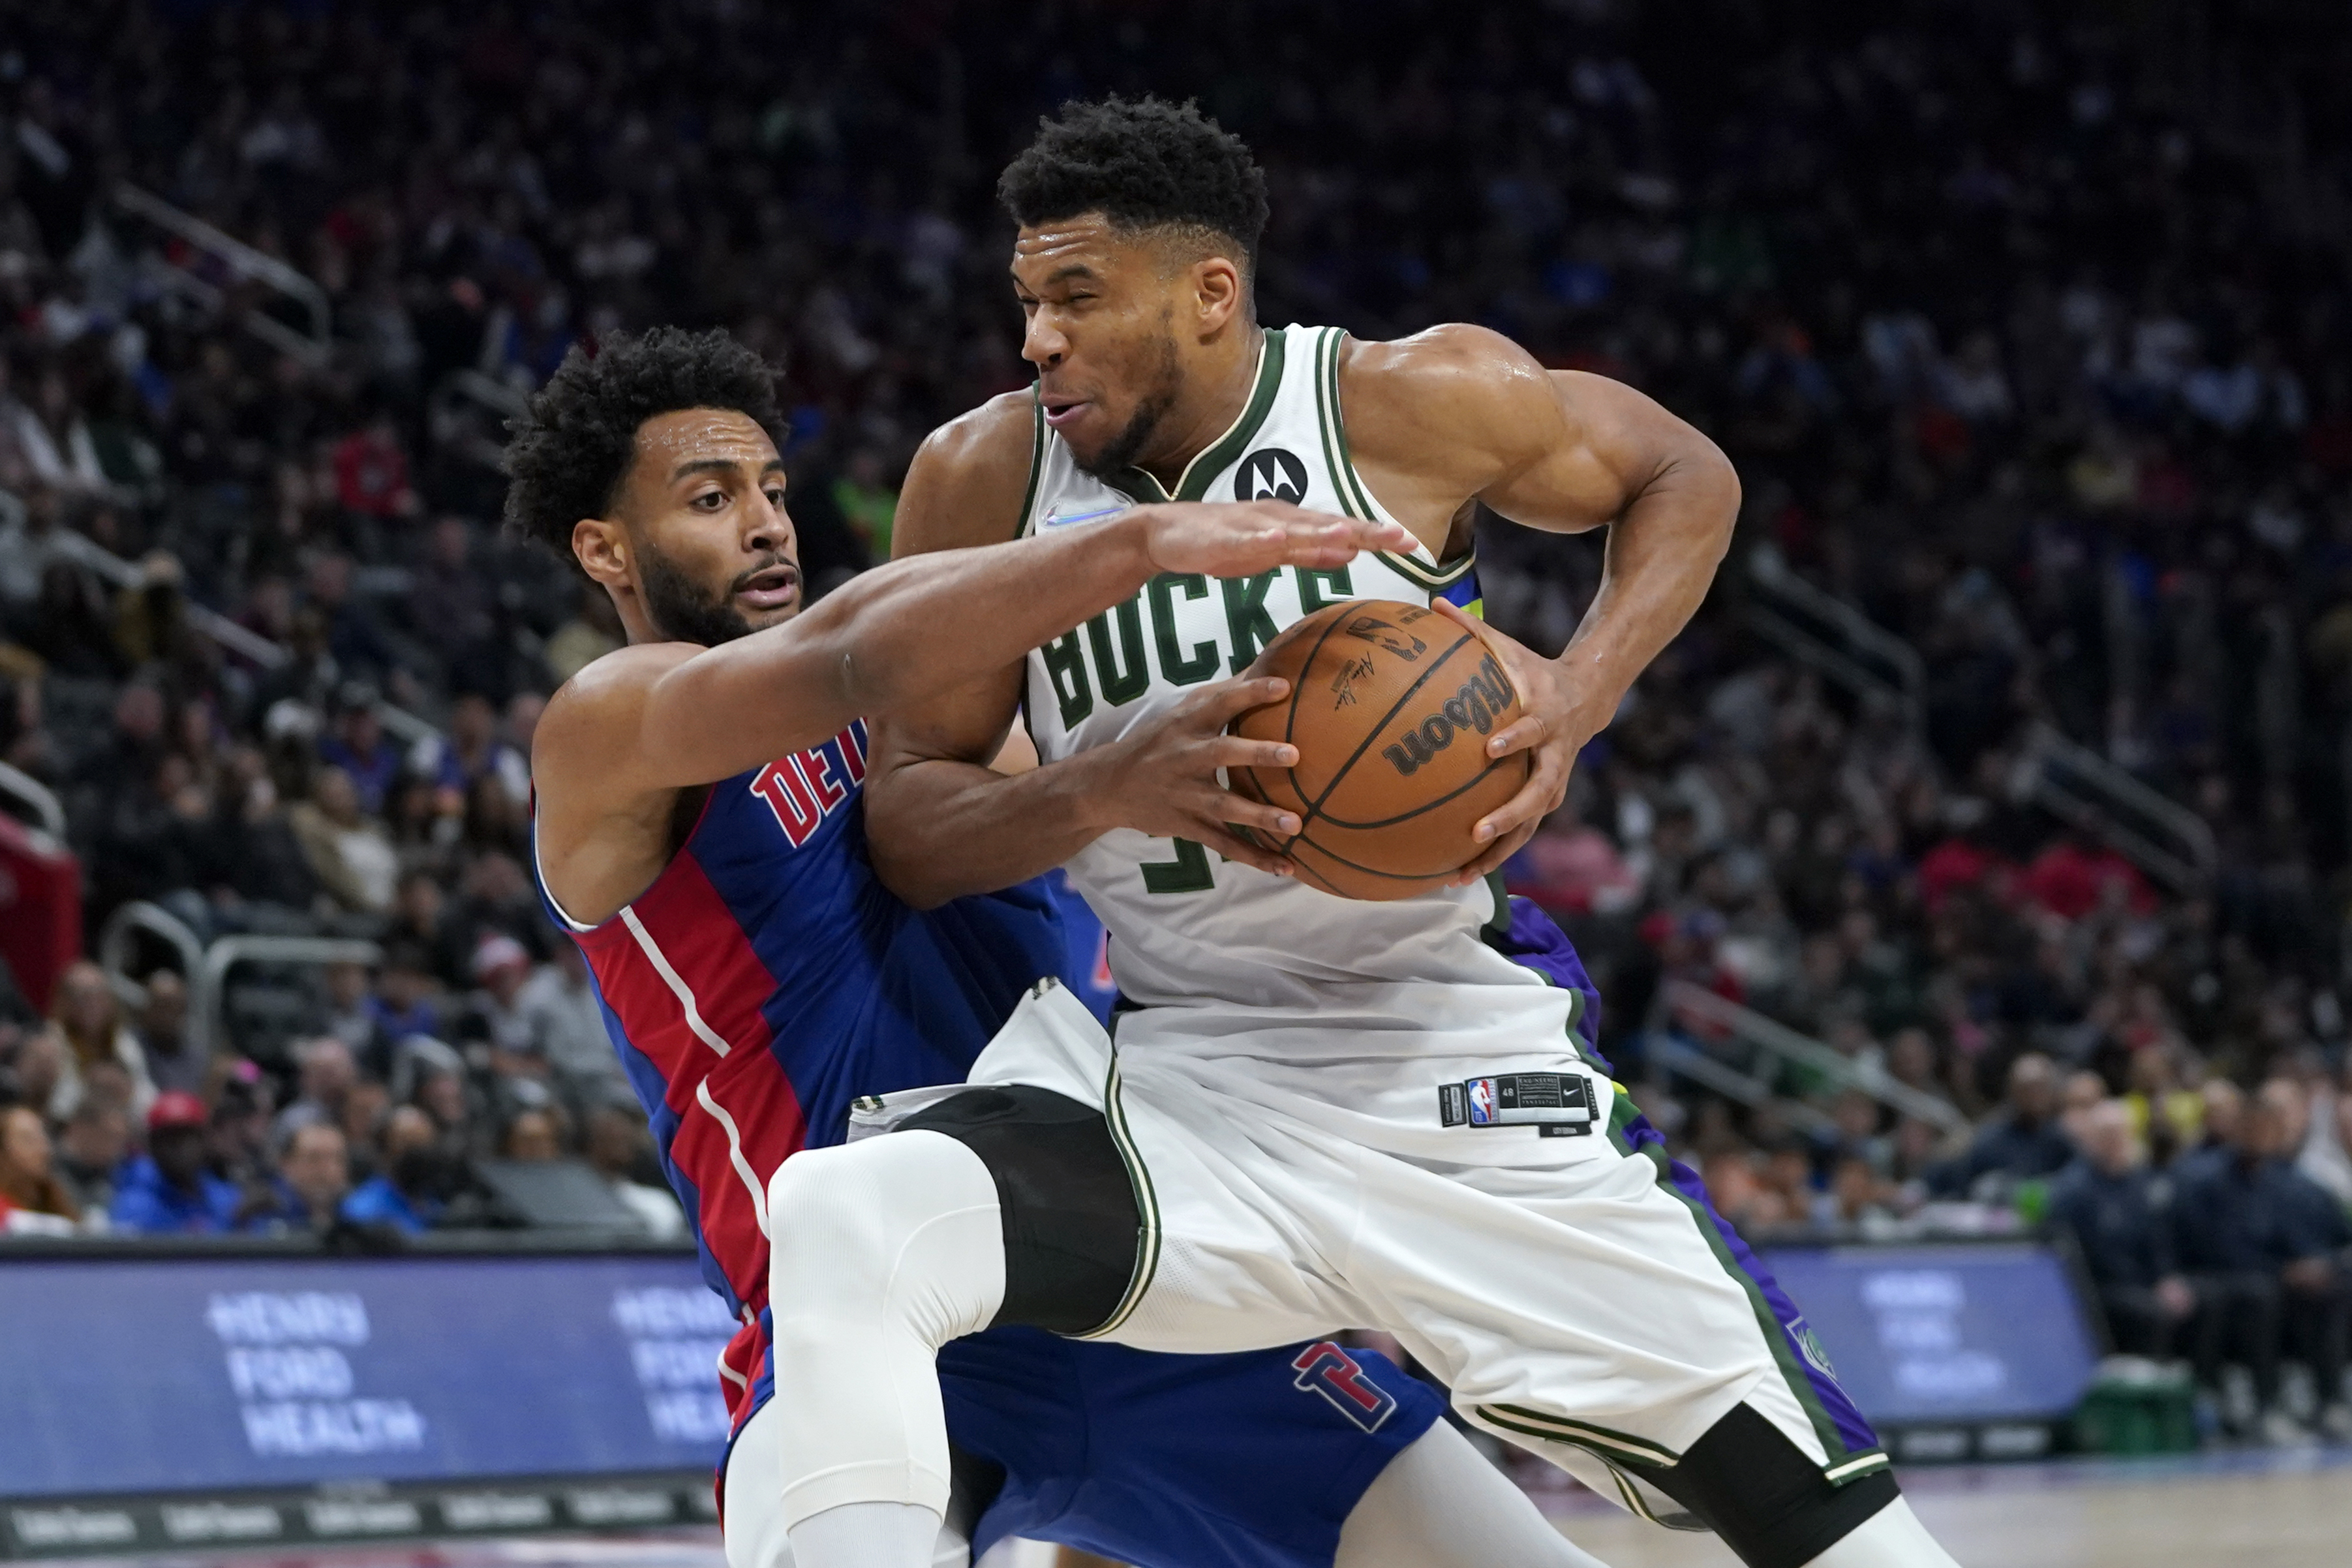 The Detroit Pistons close out road trip in Milwaukee